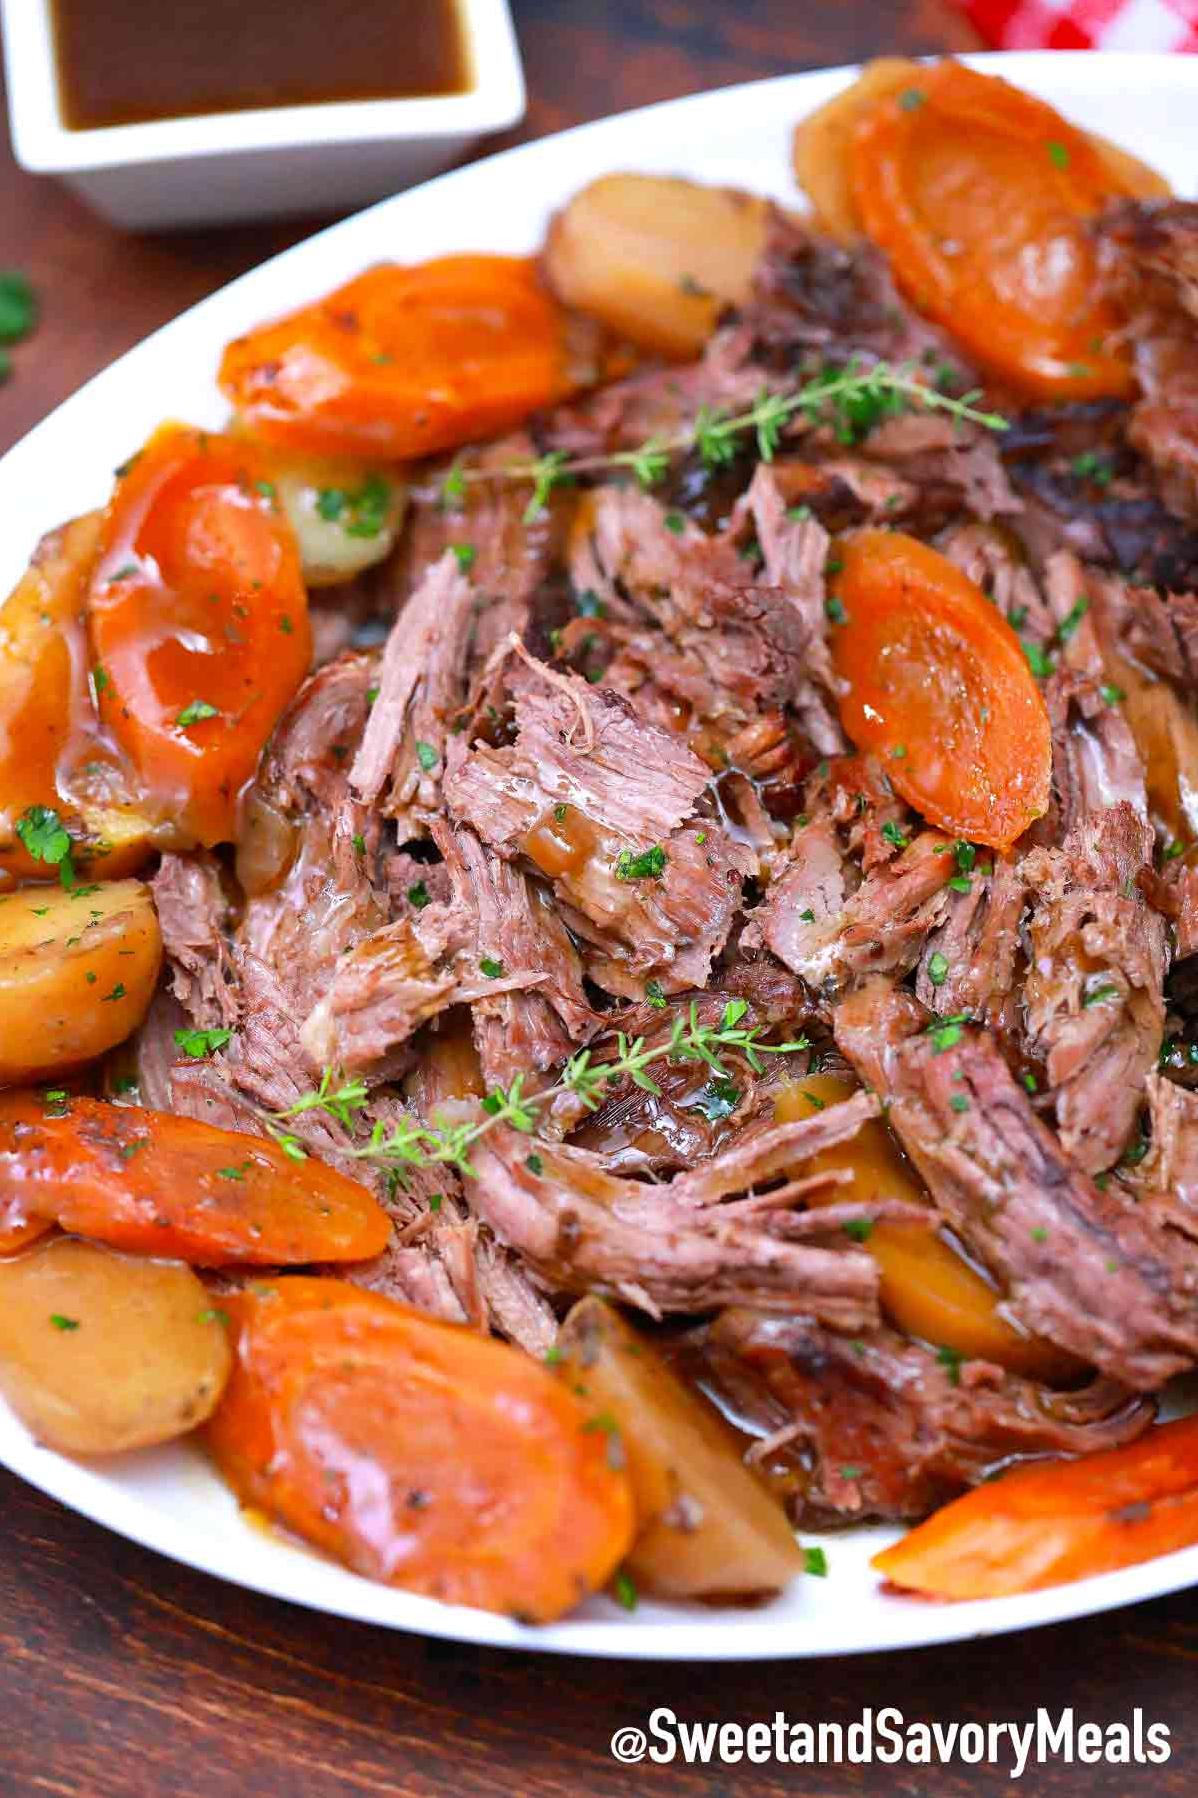  A hearty, slow-cooked meal to warm your soul on a cold night.